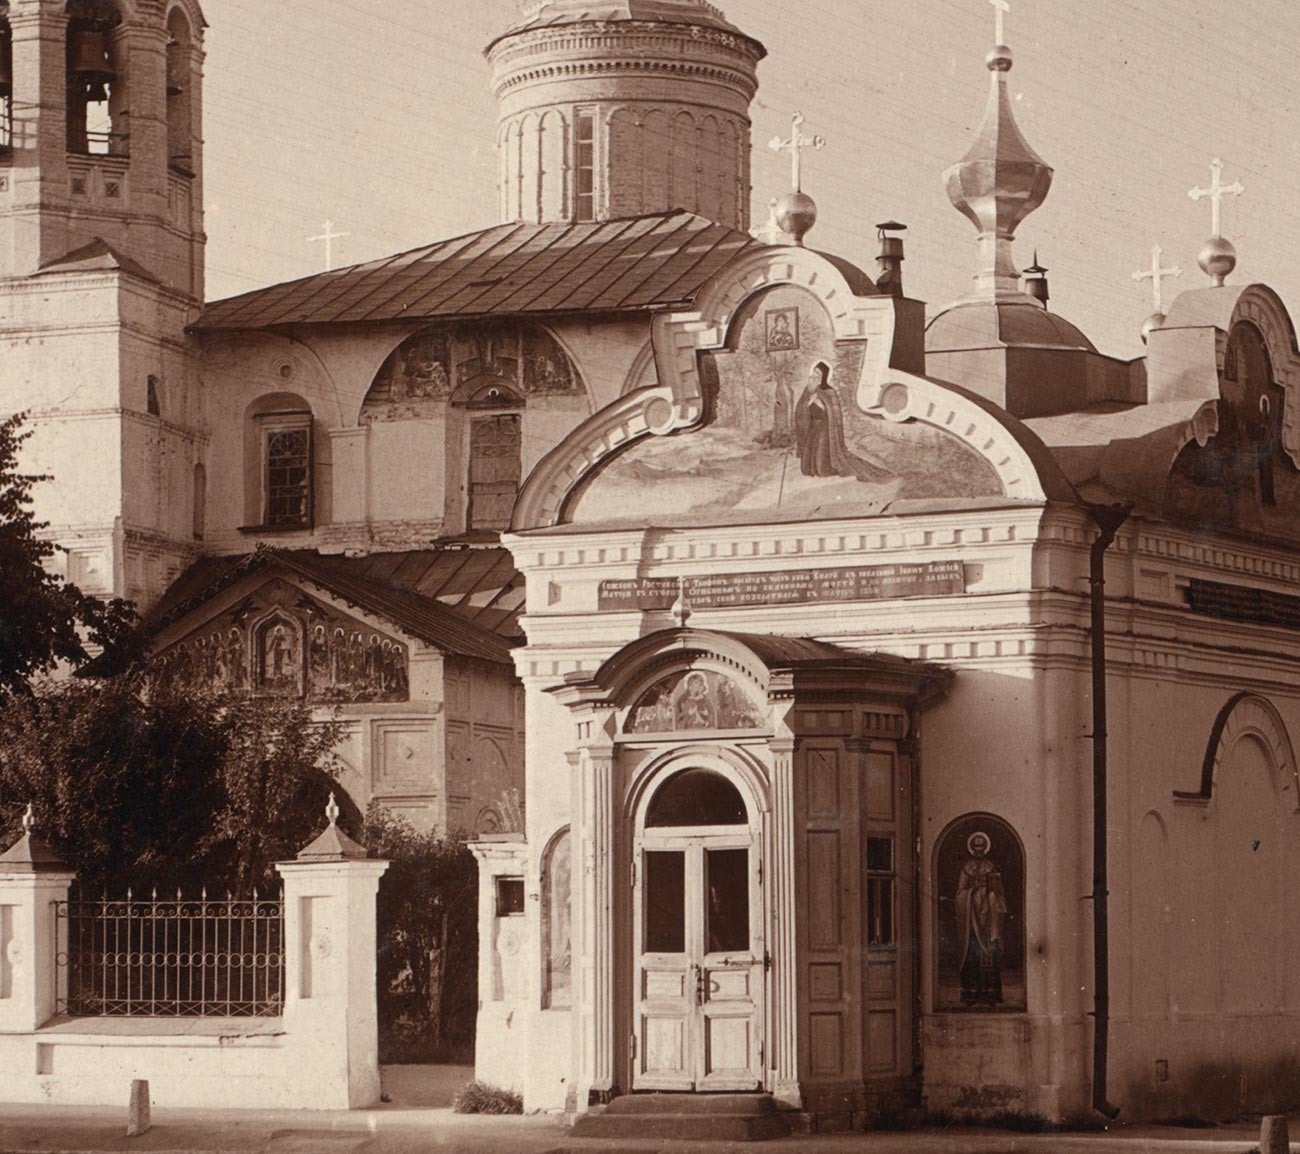 Chapel of the Tolg Icon of the Virgin (demolished early 1930s). Background: Church of St. Nicholas Nadein. Summer, 1910 